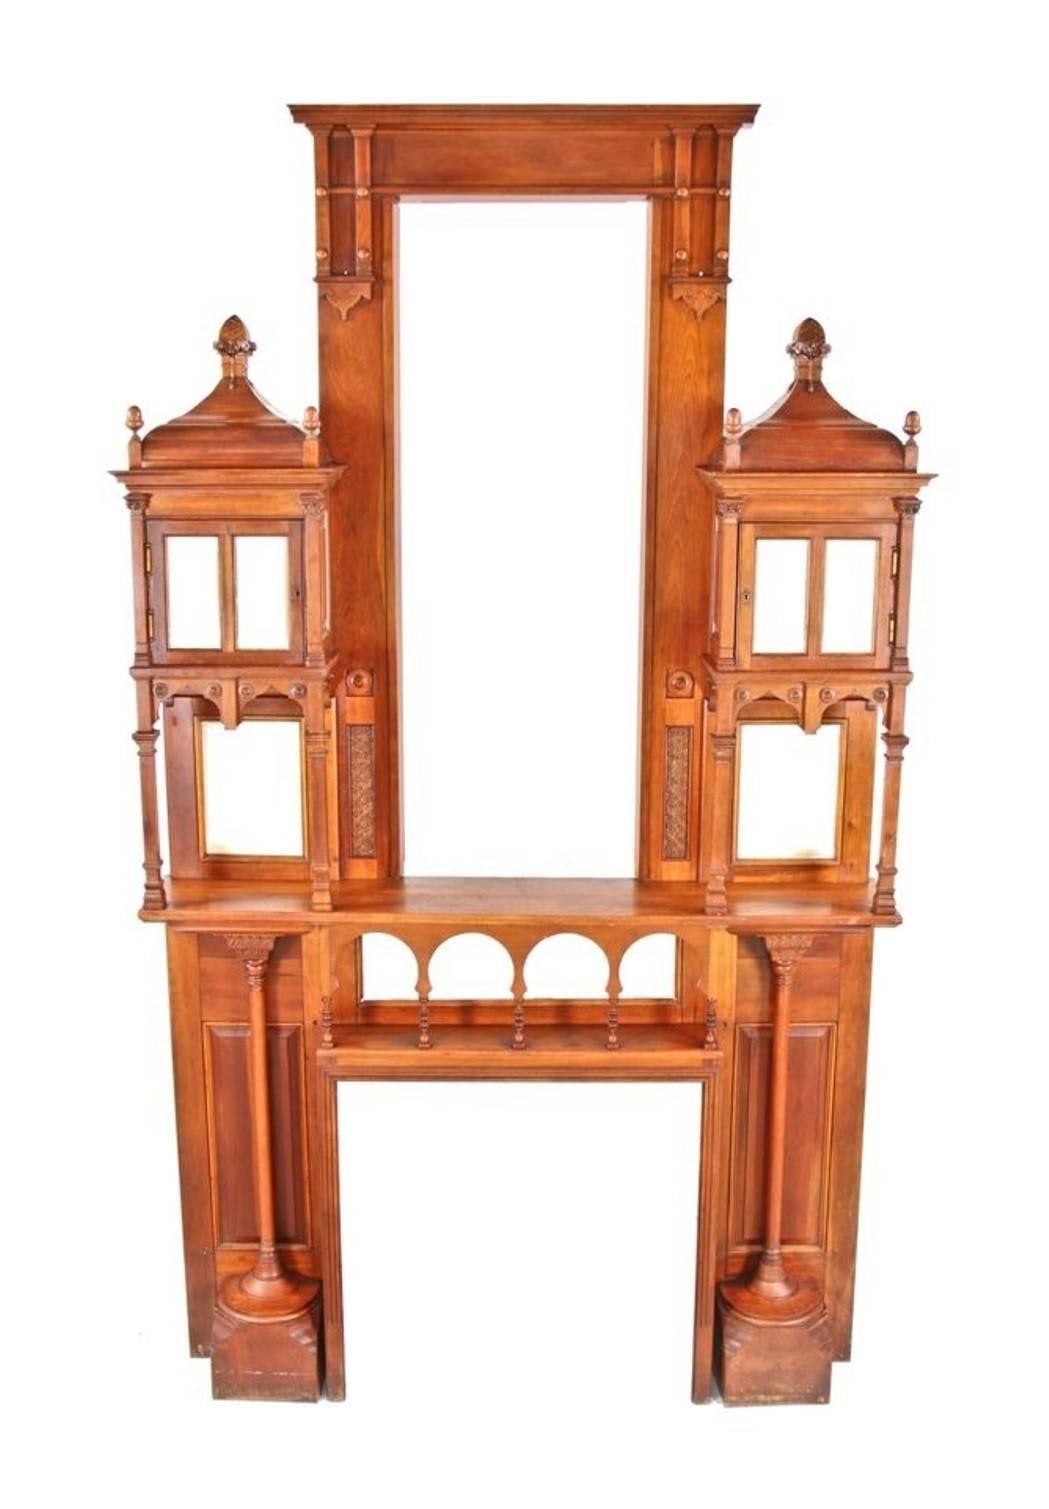 19th Century Cherry Wood Interior Mantel from the Cook Mansion